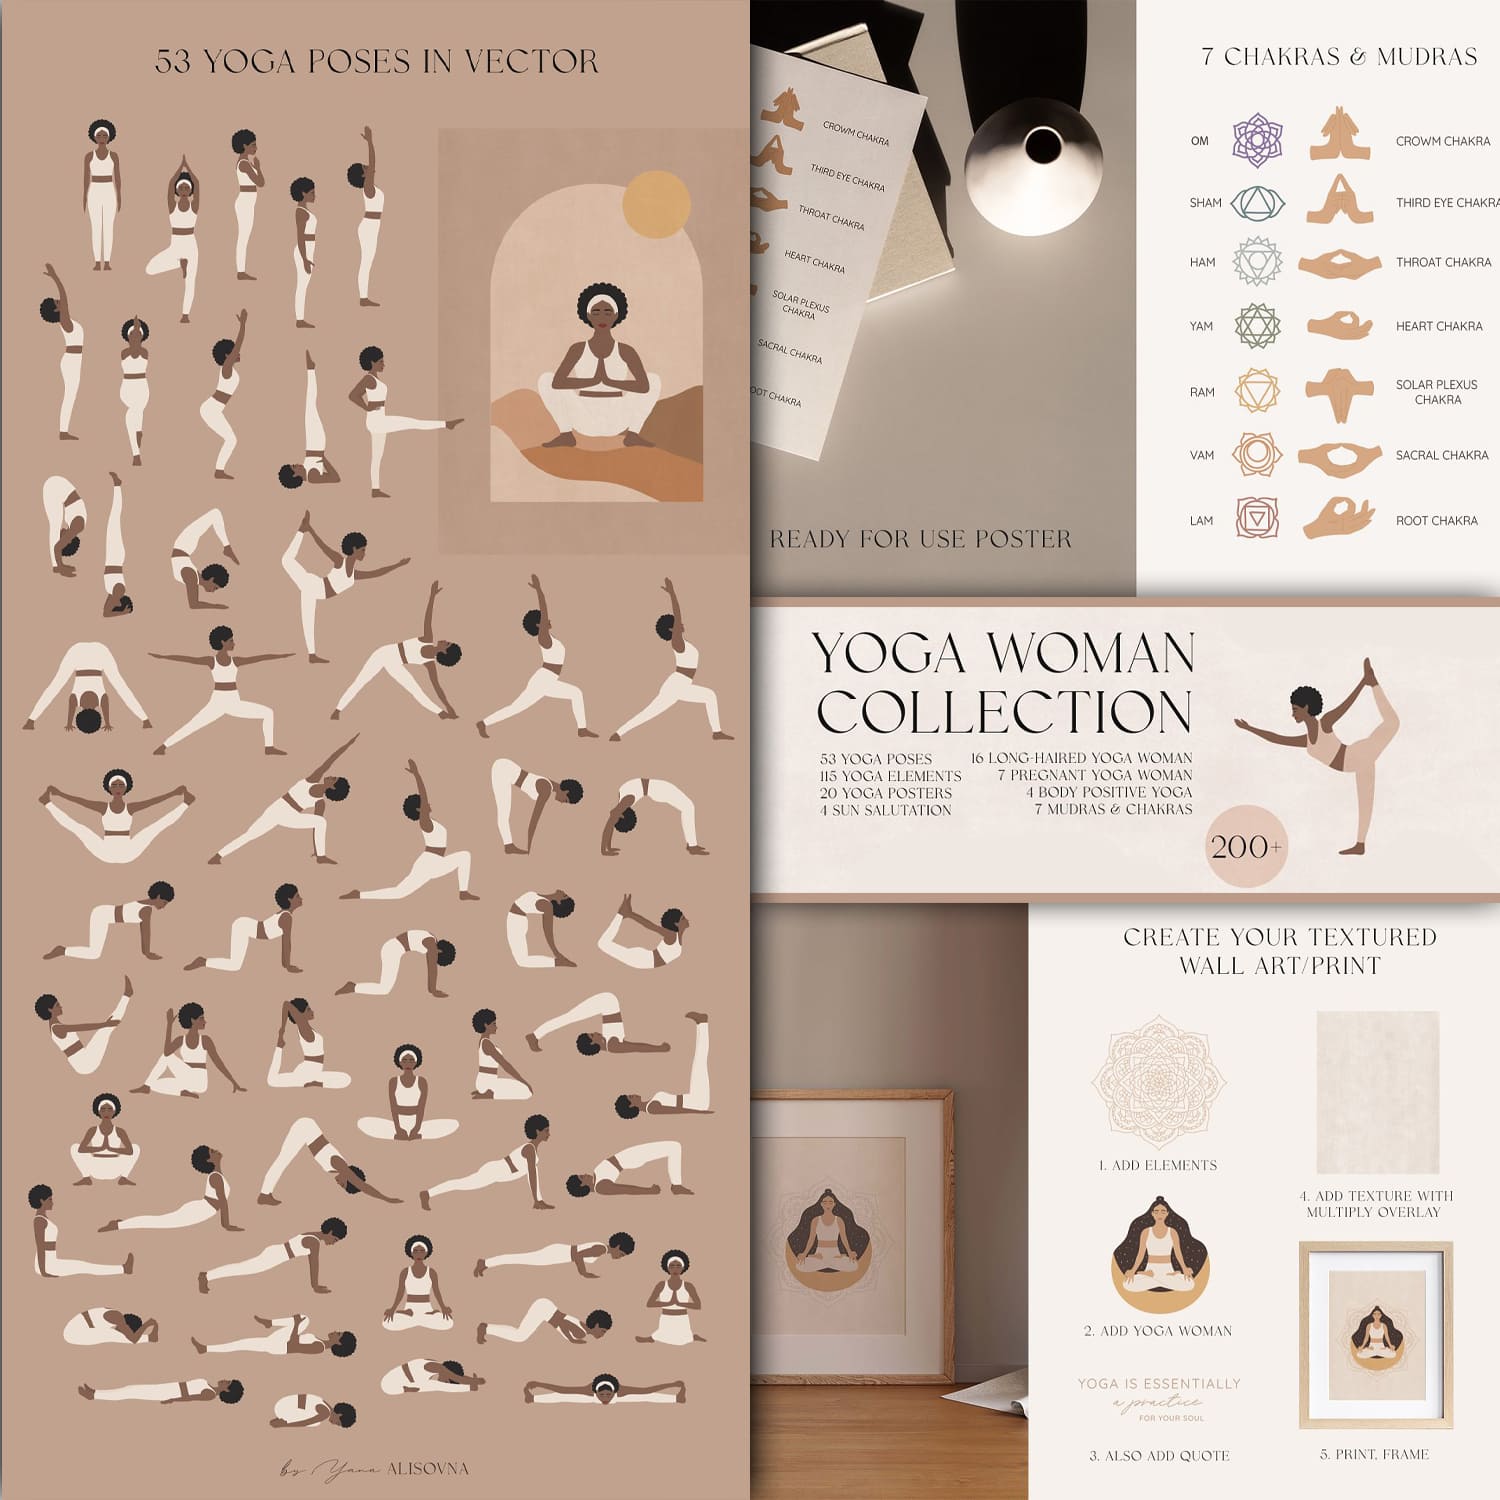 YOGA woman collection created by Alisovna.